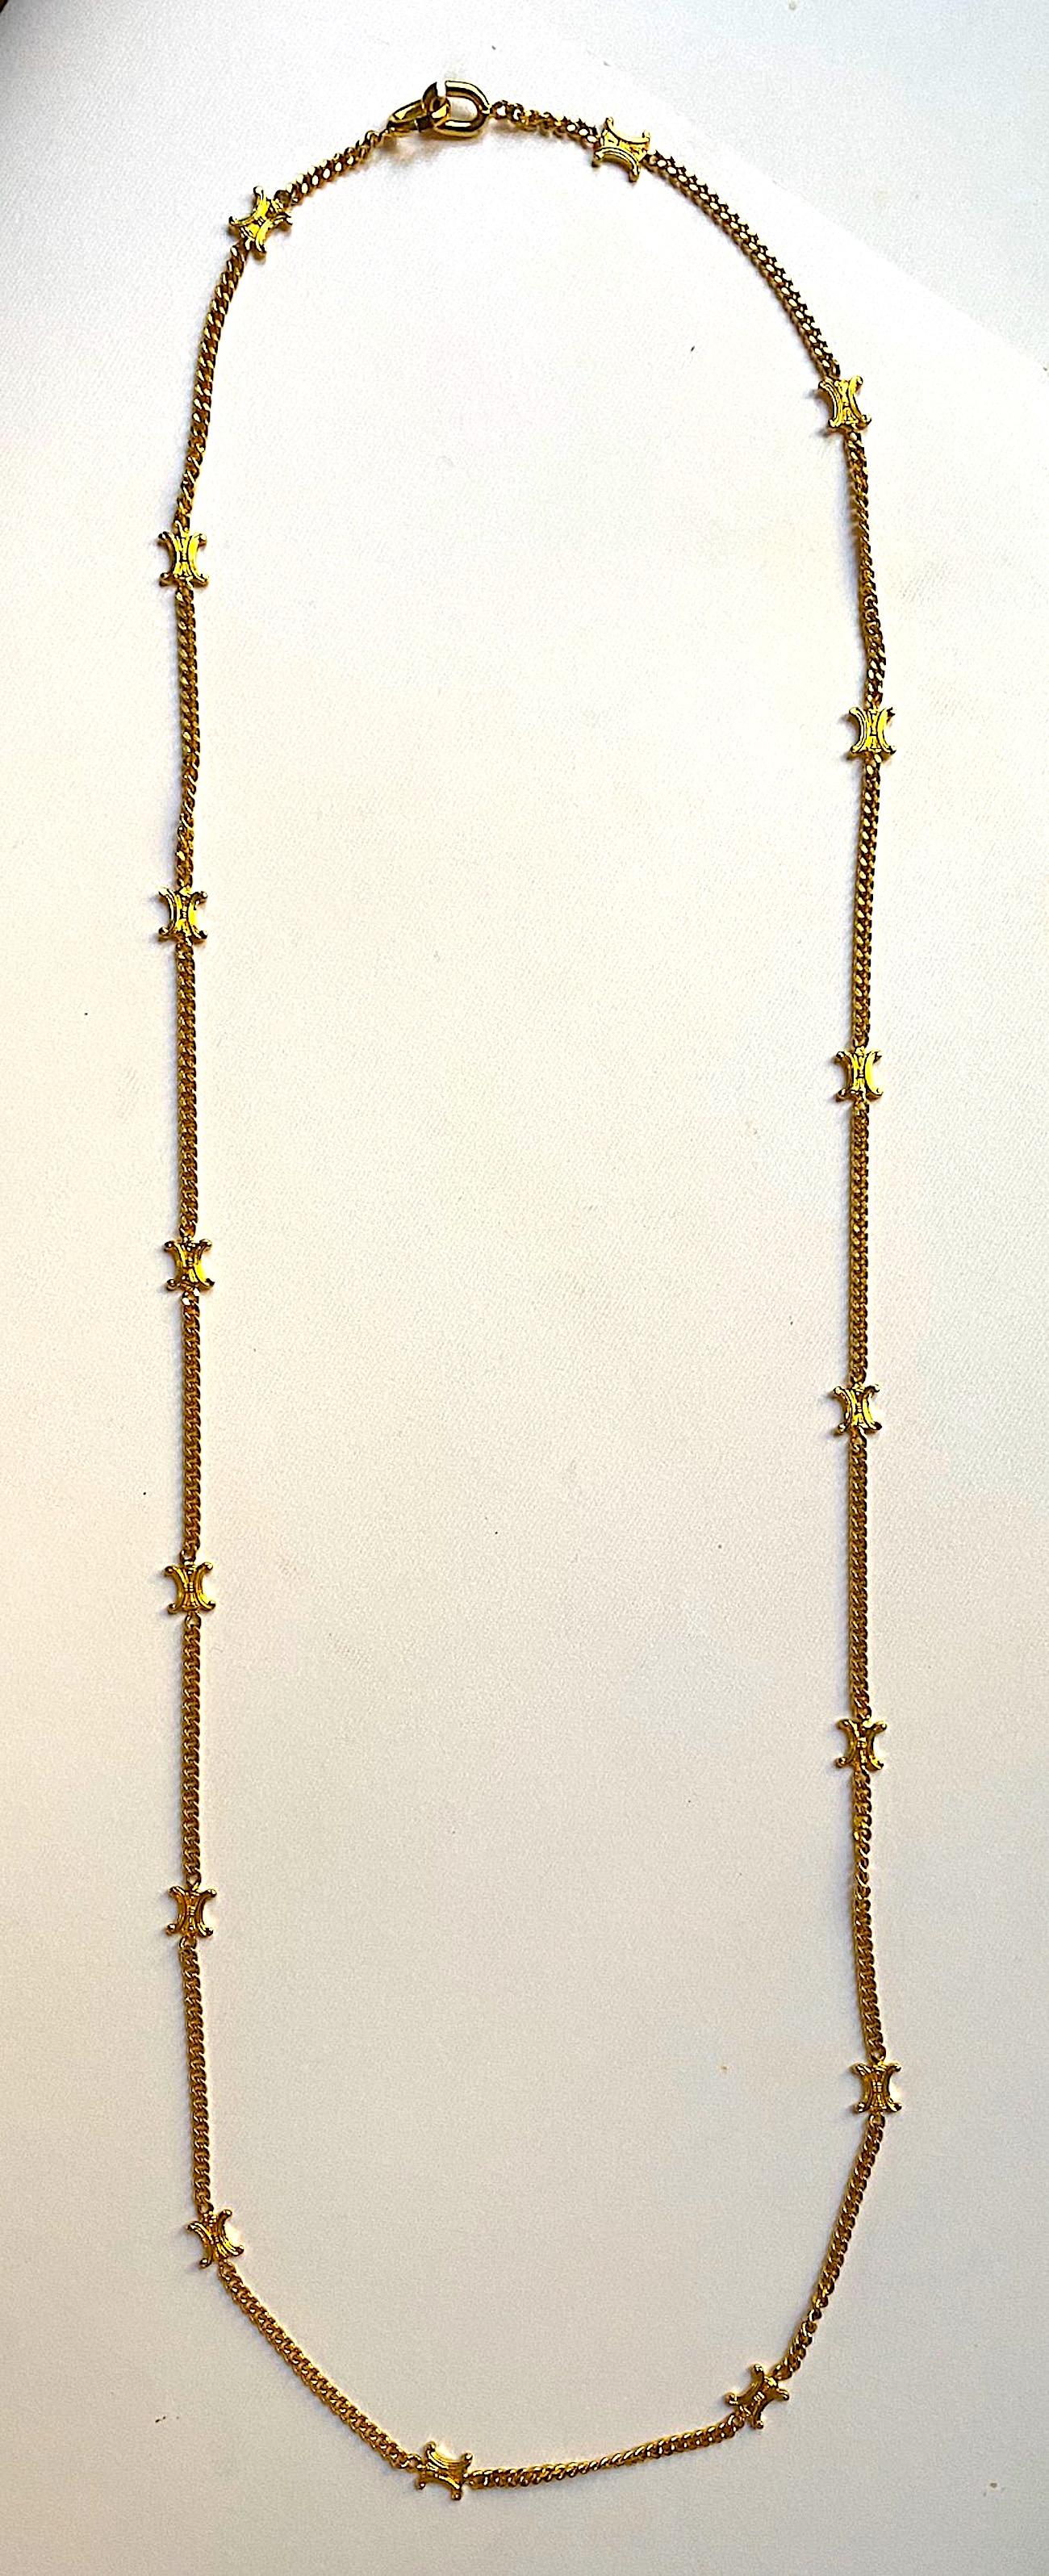 An elegant and Celine long gold necklace circa 1990. It measures 41 inches long. The gold plate necklace is comprised of 2 inch curb link chain 3 mm wide and 16 Celine logo spacers measuring .38 of an inch wide and high.The clasp is two oval links